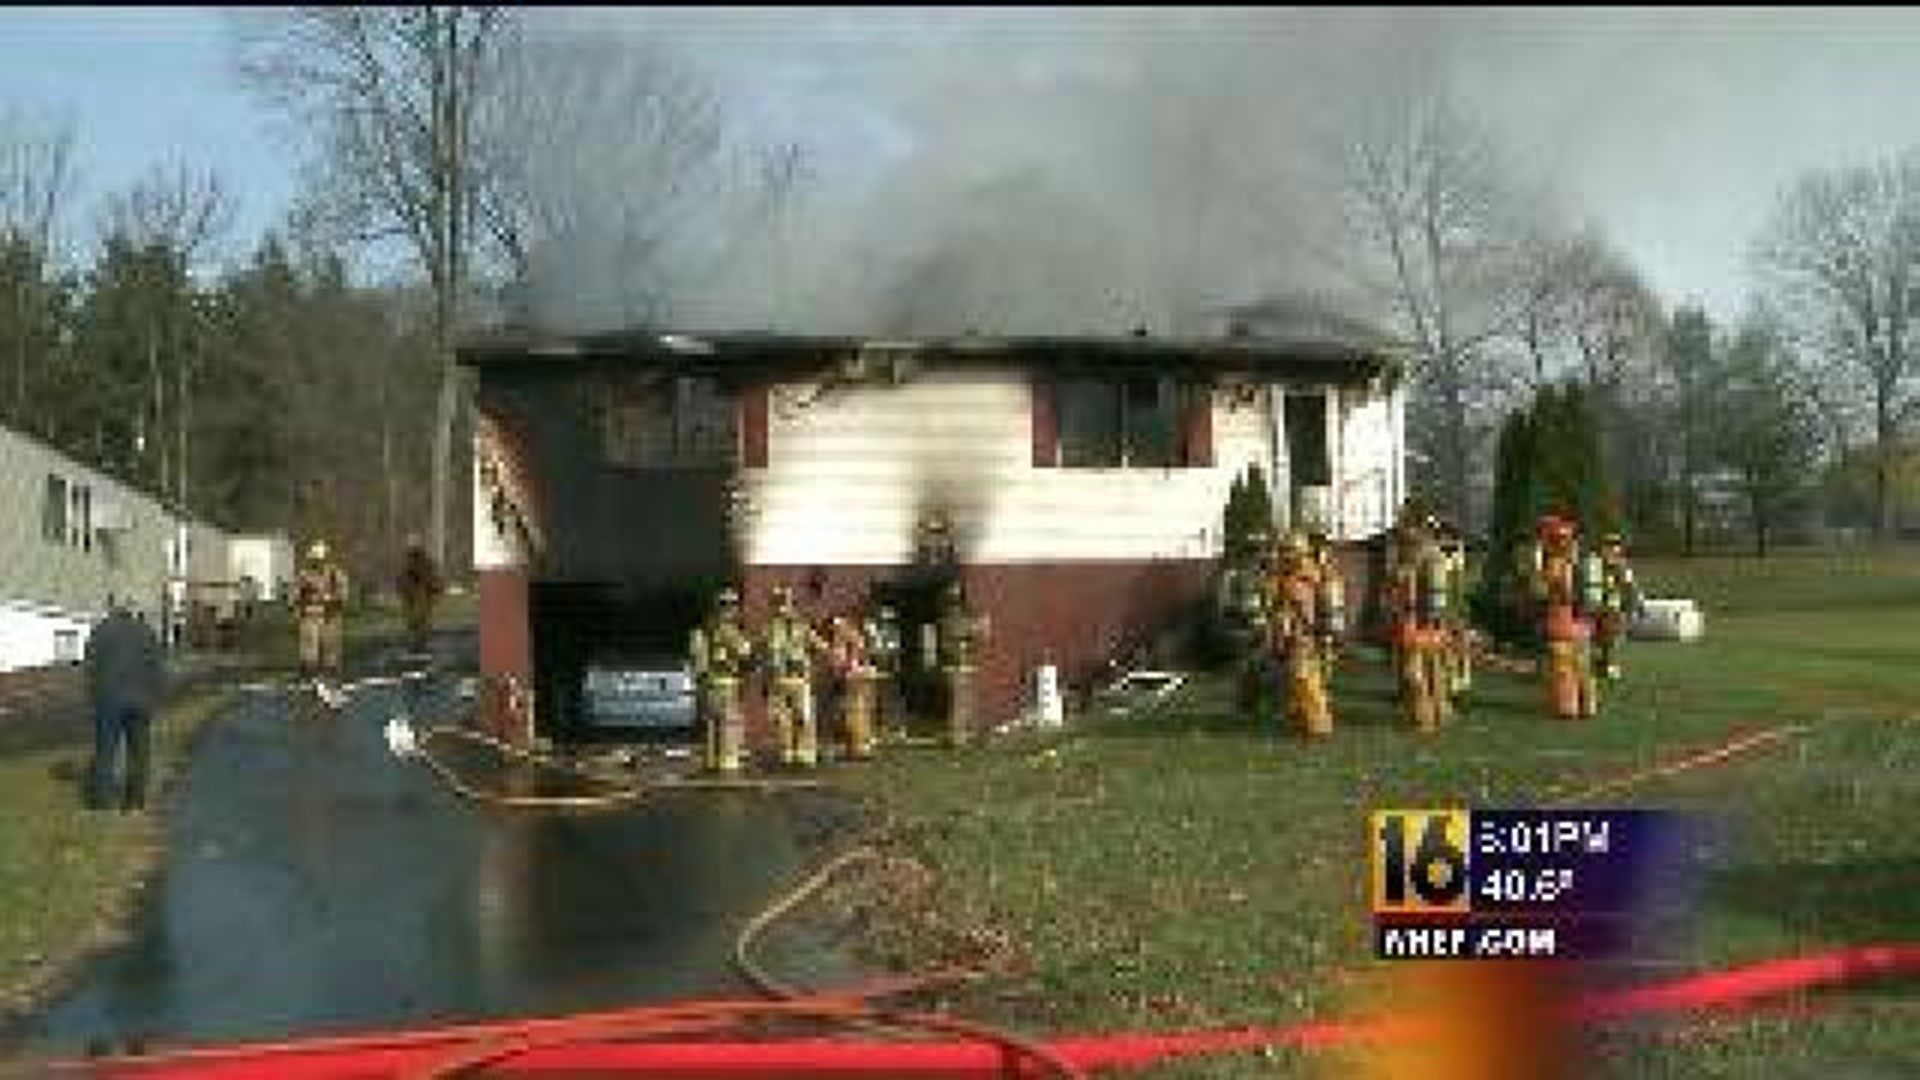 Man Loses House in Fire, Again